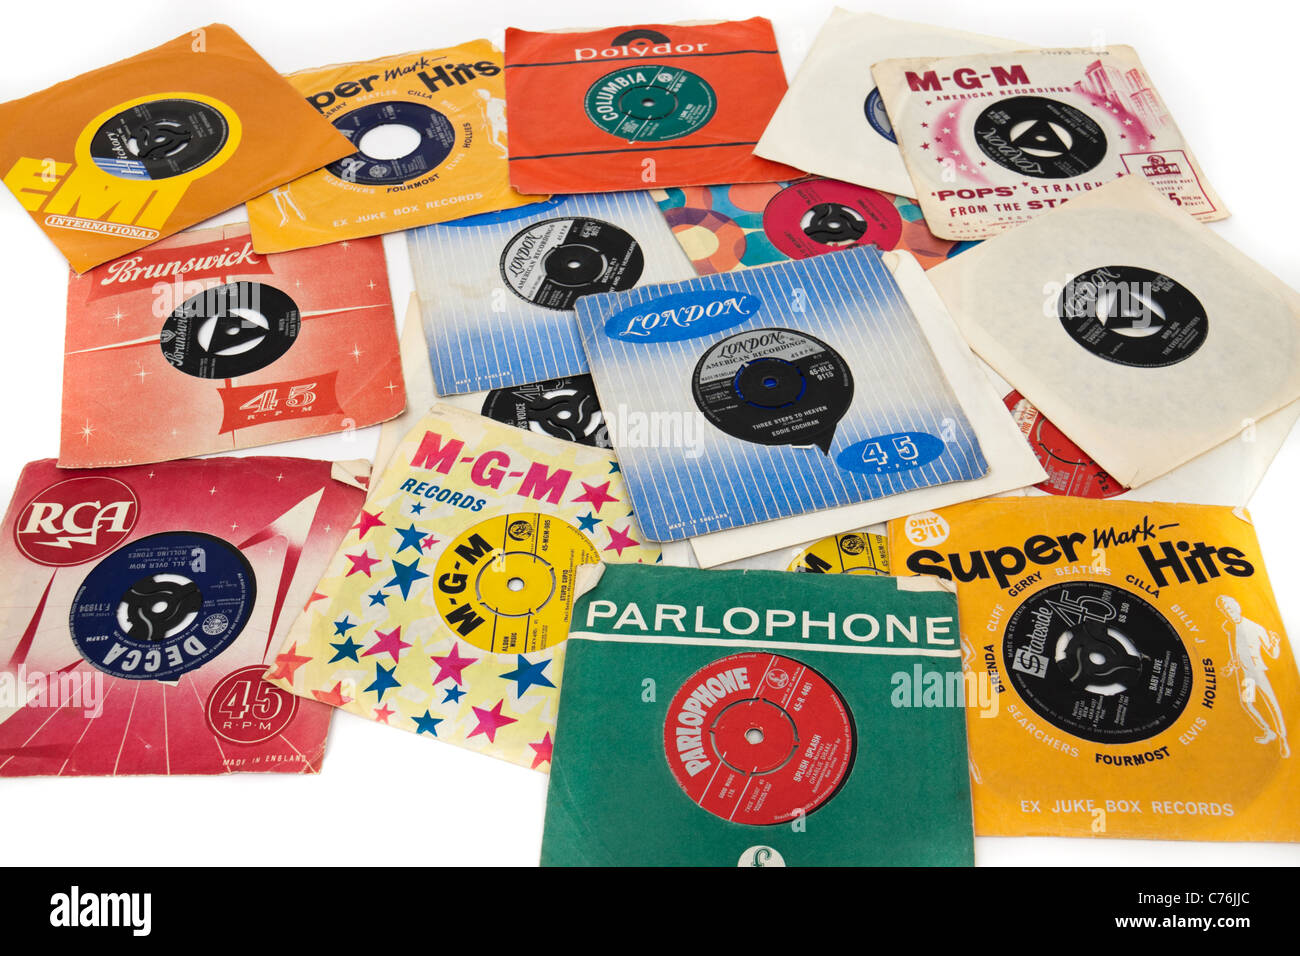 Collection of 1960's vintage 7' vinyl singles / records Stock Photo